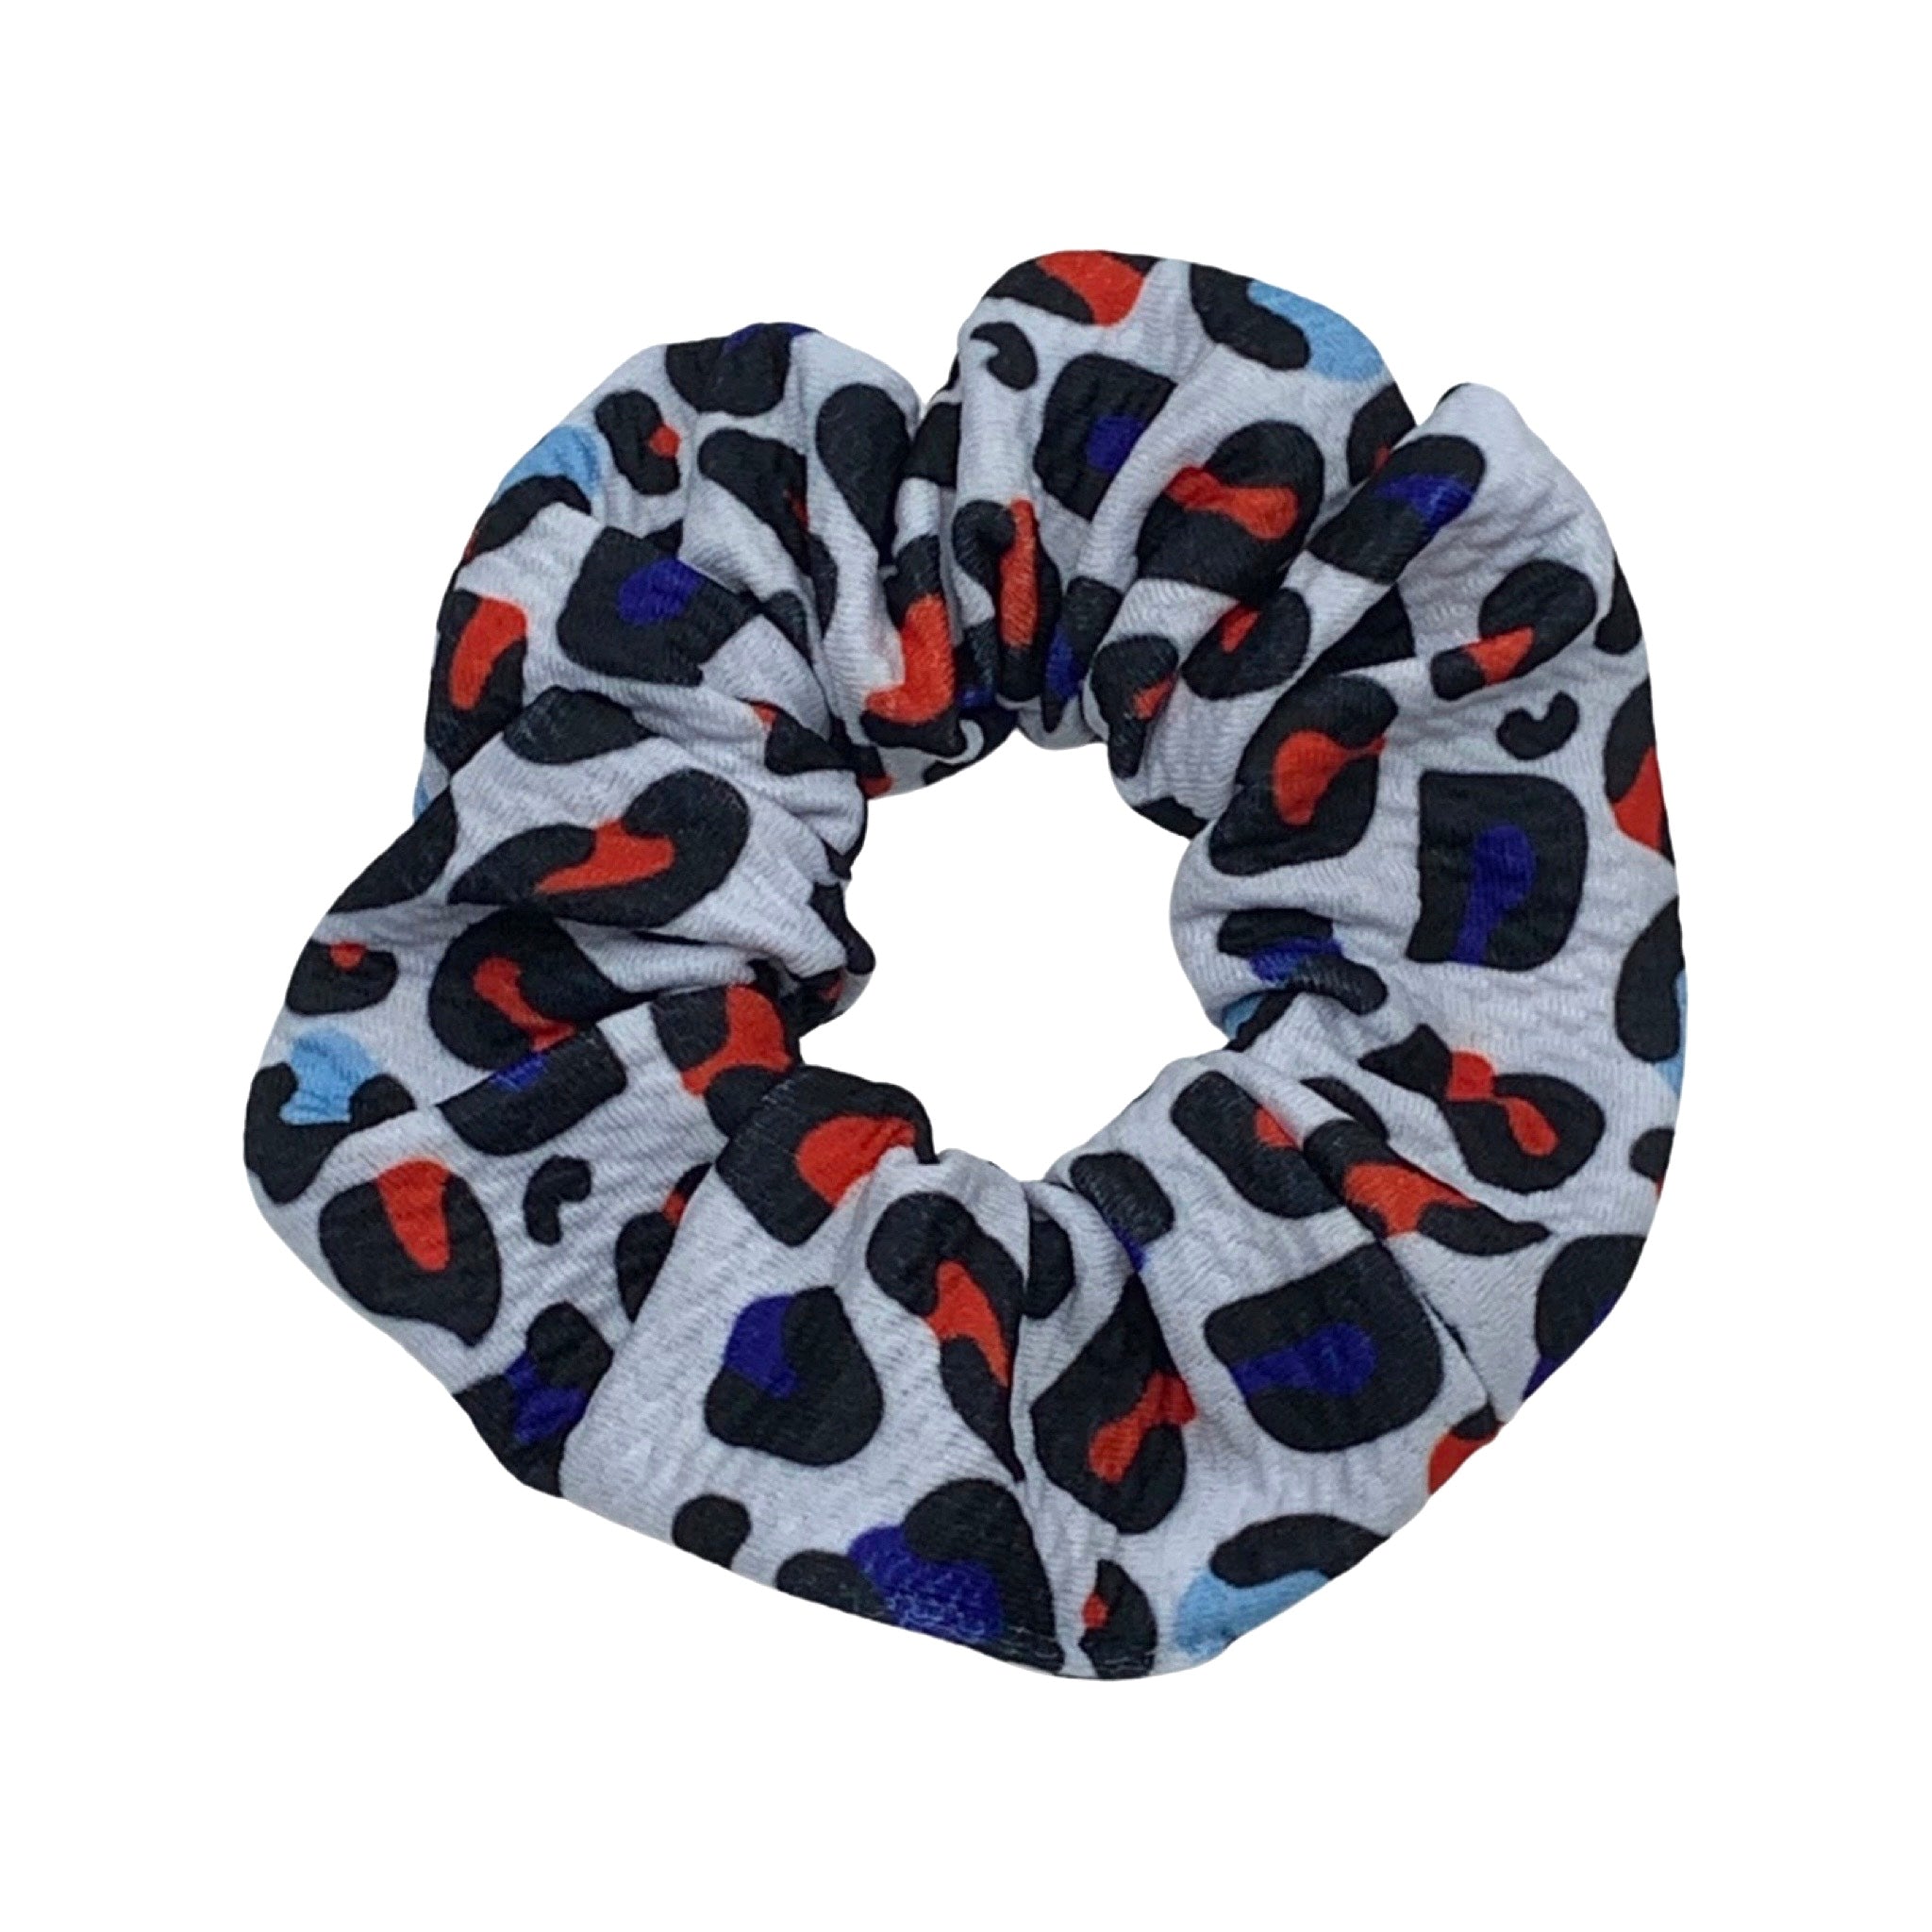 White American Leopard Thank You Bullet Scrunchie Filler Pack, 1 per pack. Now available with Logo Sticker Add On Option!